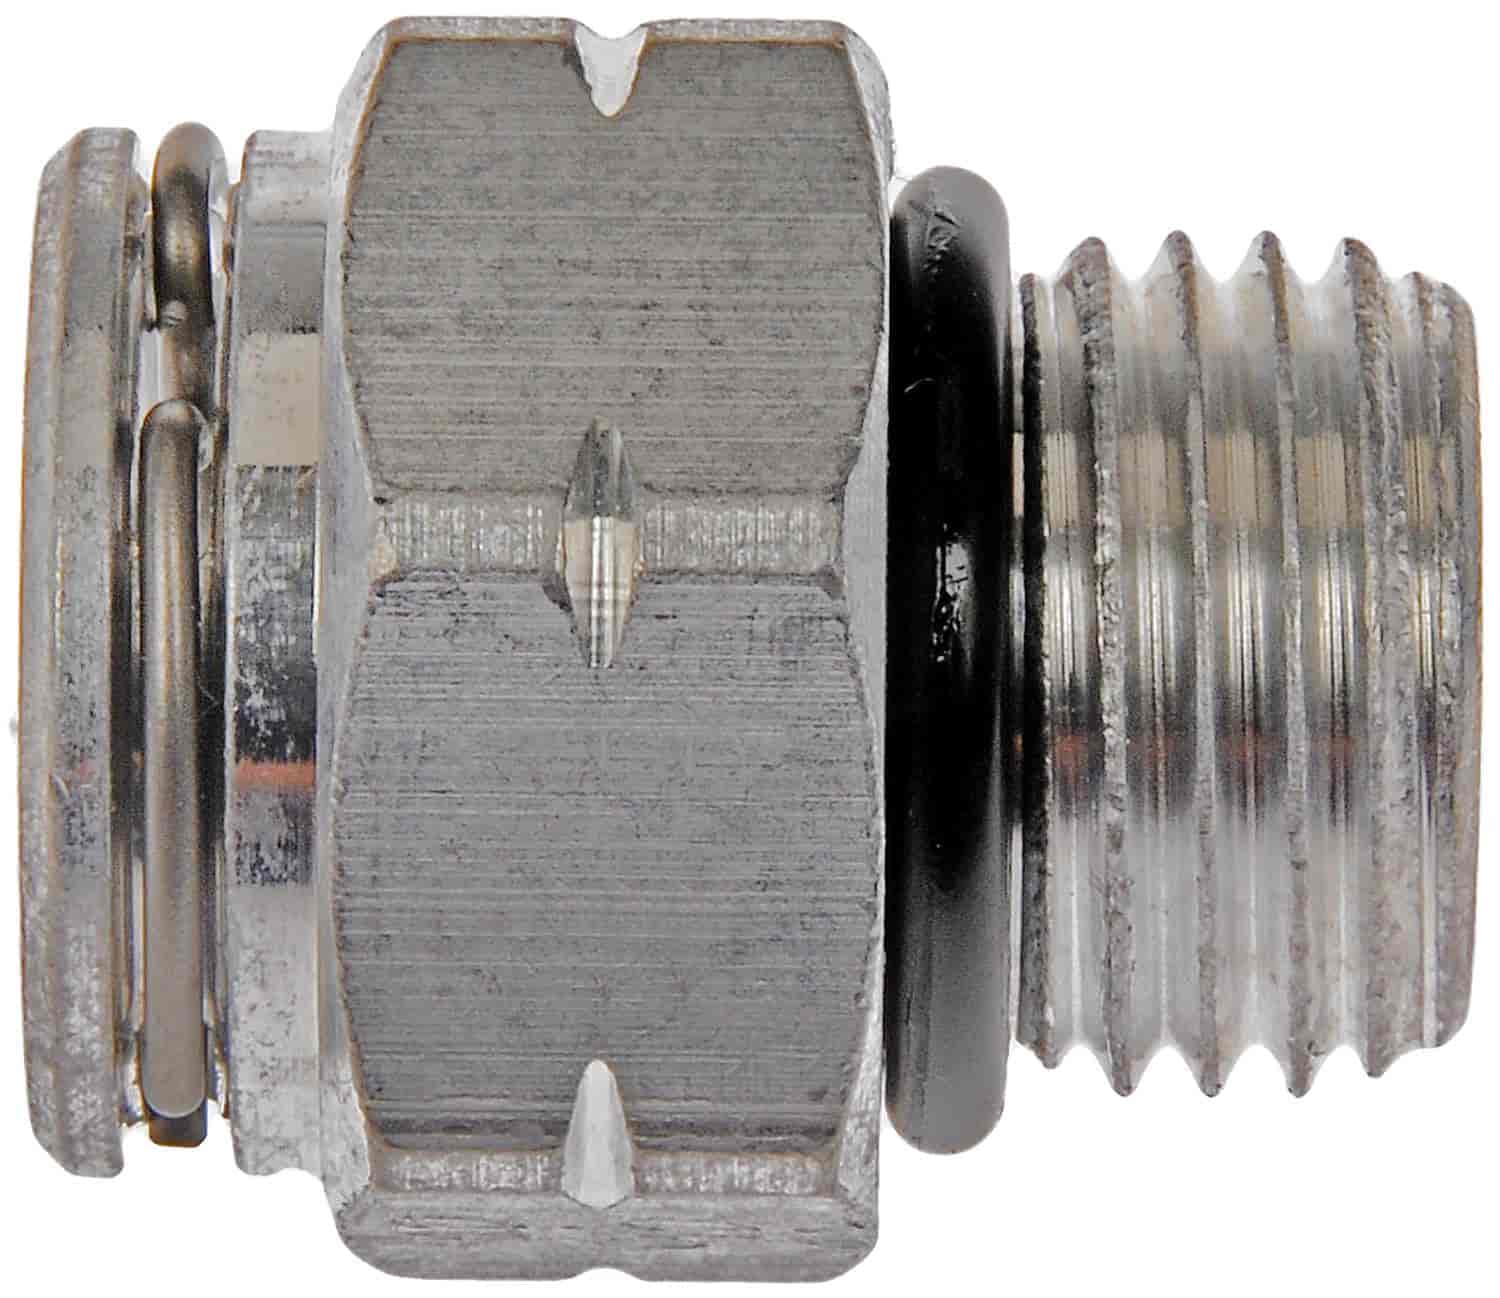 Transmission Line Connector - Tube Size 3/8 - Thread 9/16-18UNF